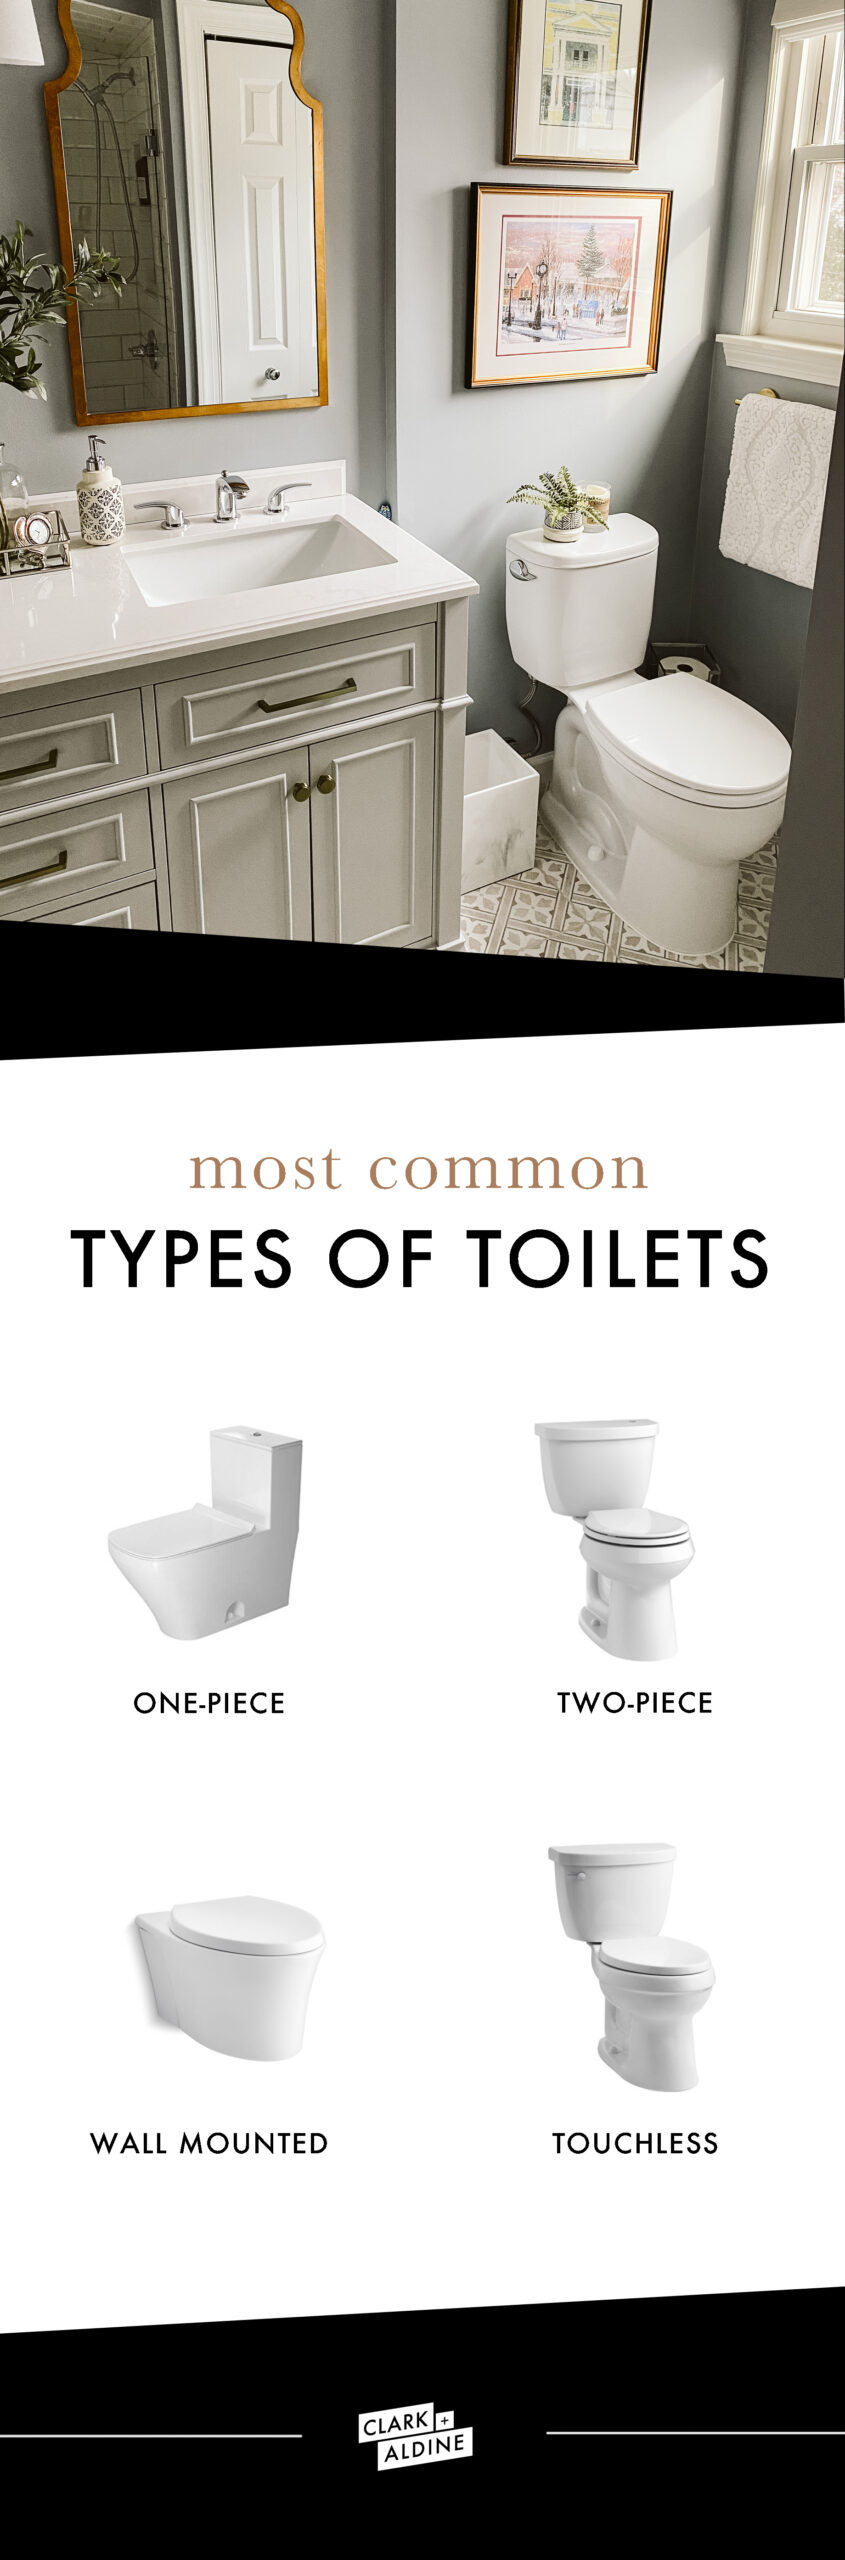 TYPES OF TOILETS image 1